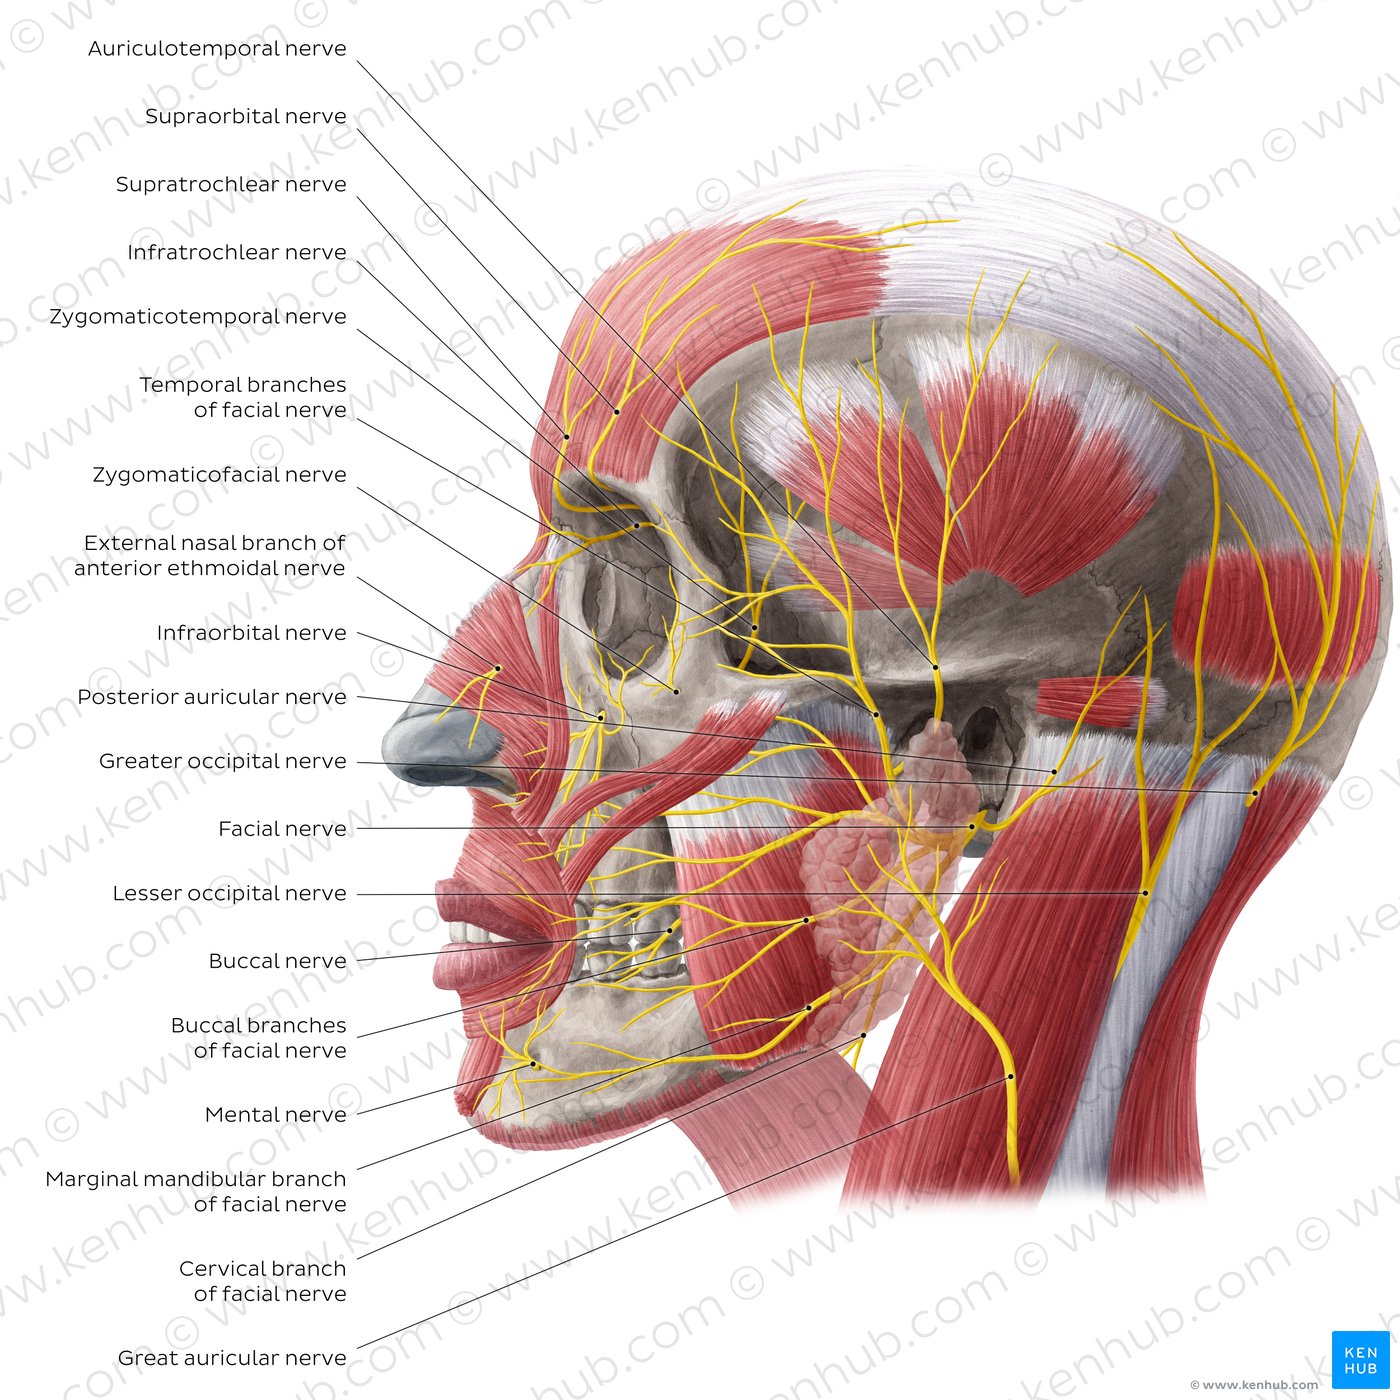 Nerves of the face and scalp - lateral view